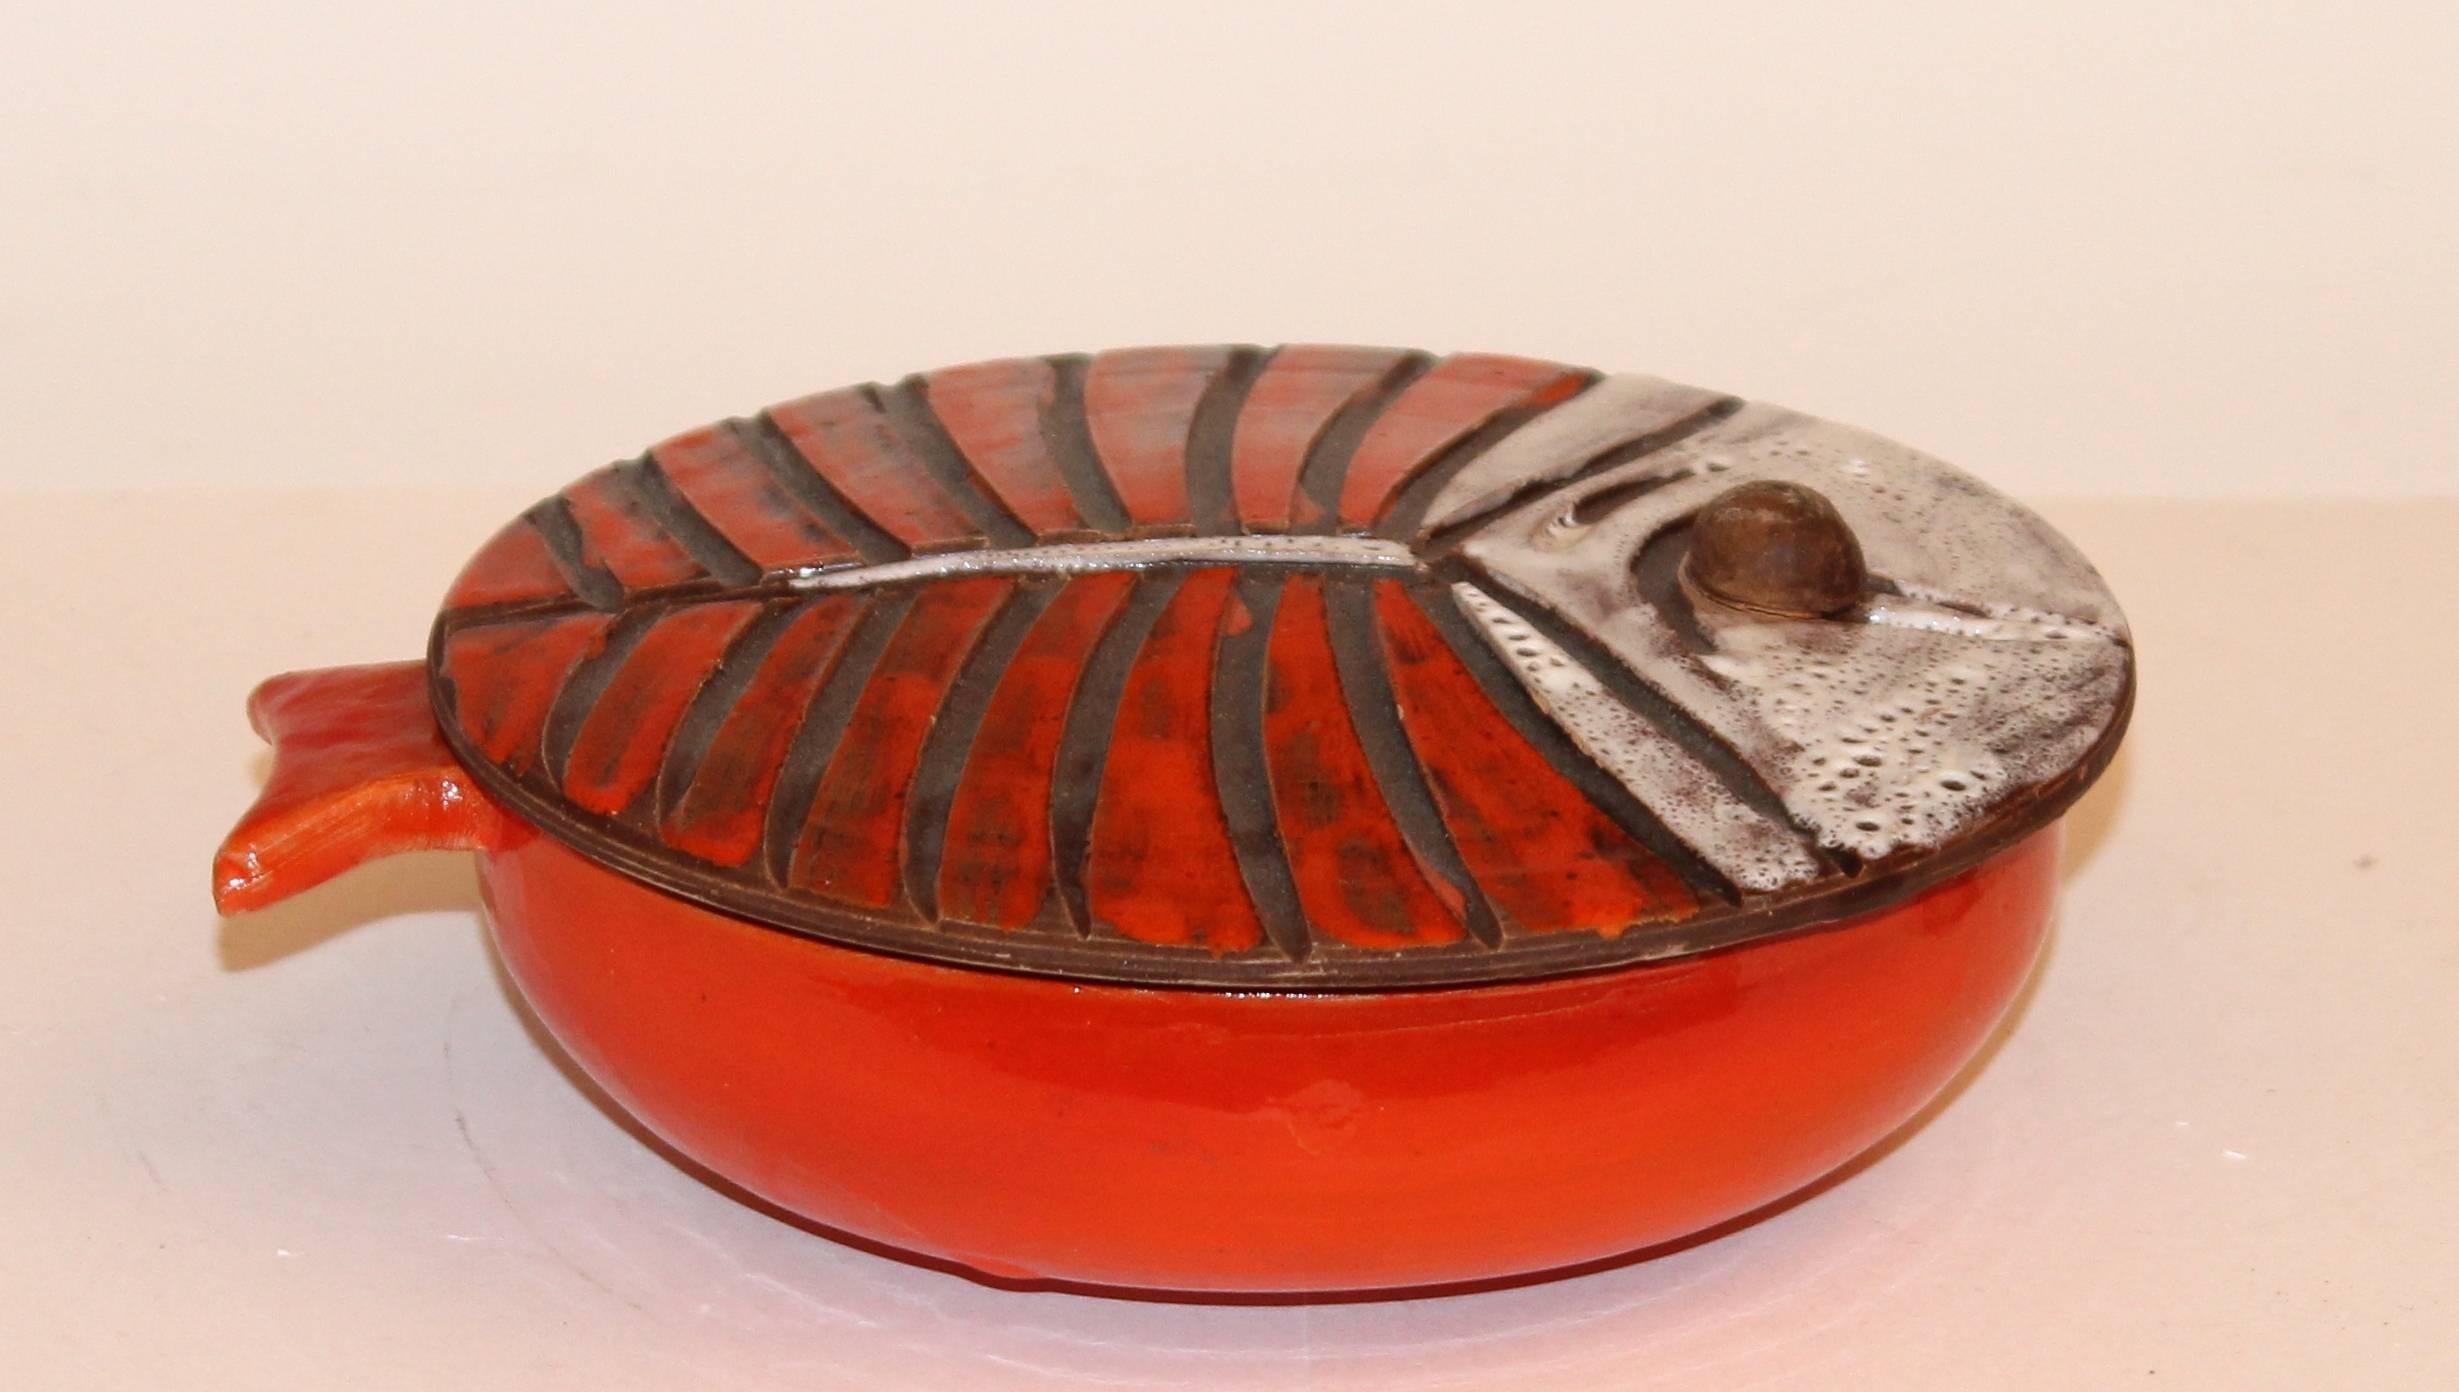 Great, vintage, hand made Vallauris pottery covered dish in the form of a spiny flat fish, circa 1960. Expressively decorated with single large eye knop, deeply carved 